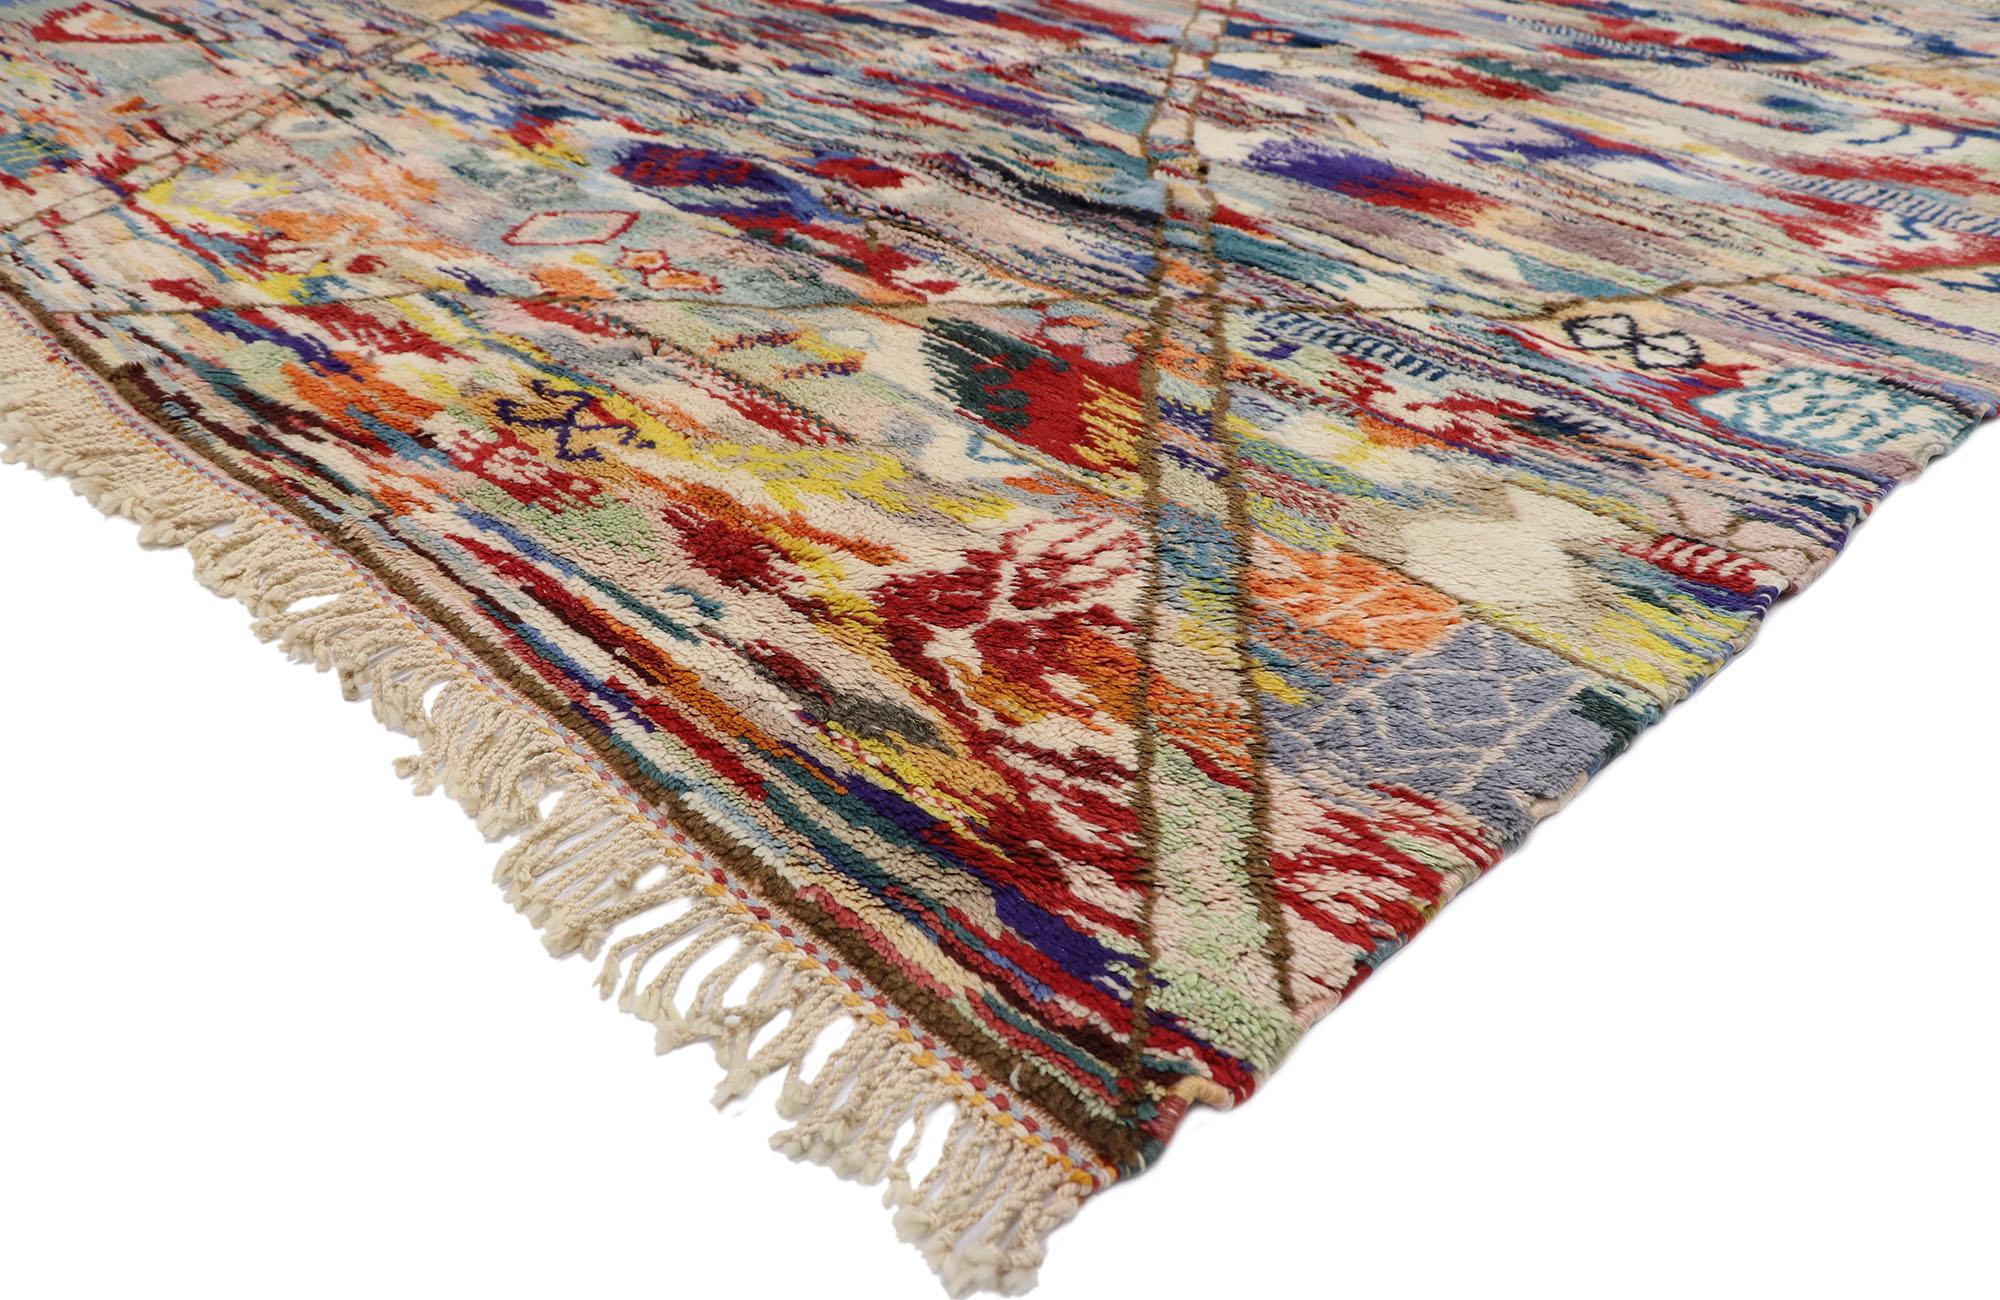 21155 New Contemporary Berber Moroccan rug with Abstract Expressionist Style 10'05 x 13'02. Showcasing a bold expressive design, incredible detail and texture, this hand knotted wool contemporary Berber Moroccan rug is a captivating vision of woven